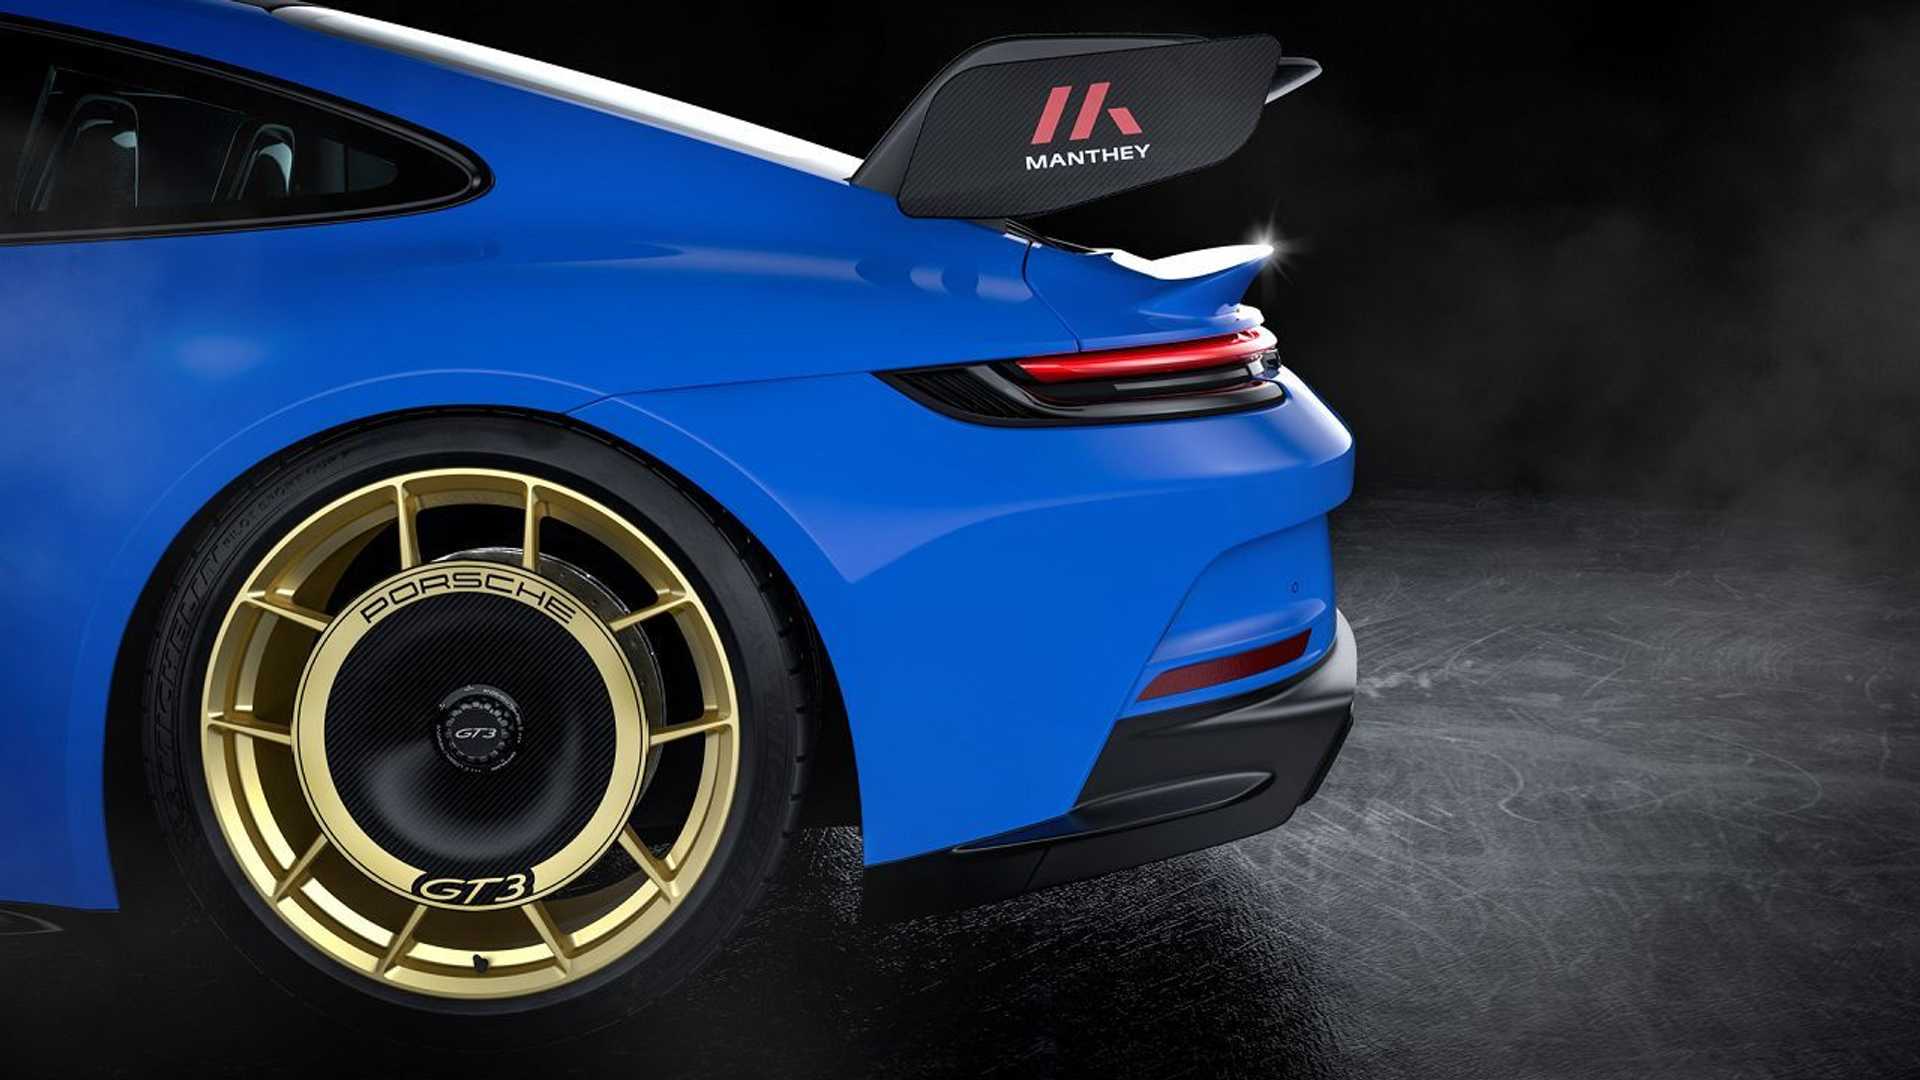 Look out for Manthey's performance kit for the Porsche 911 GT3